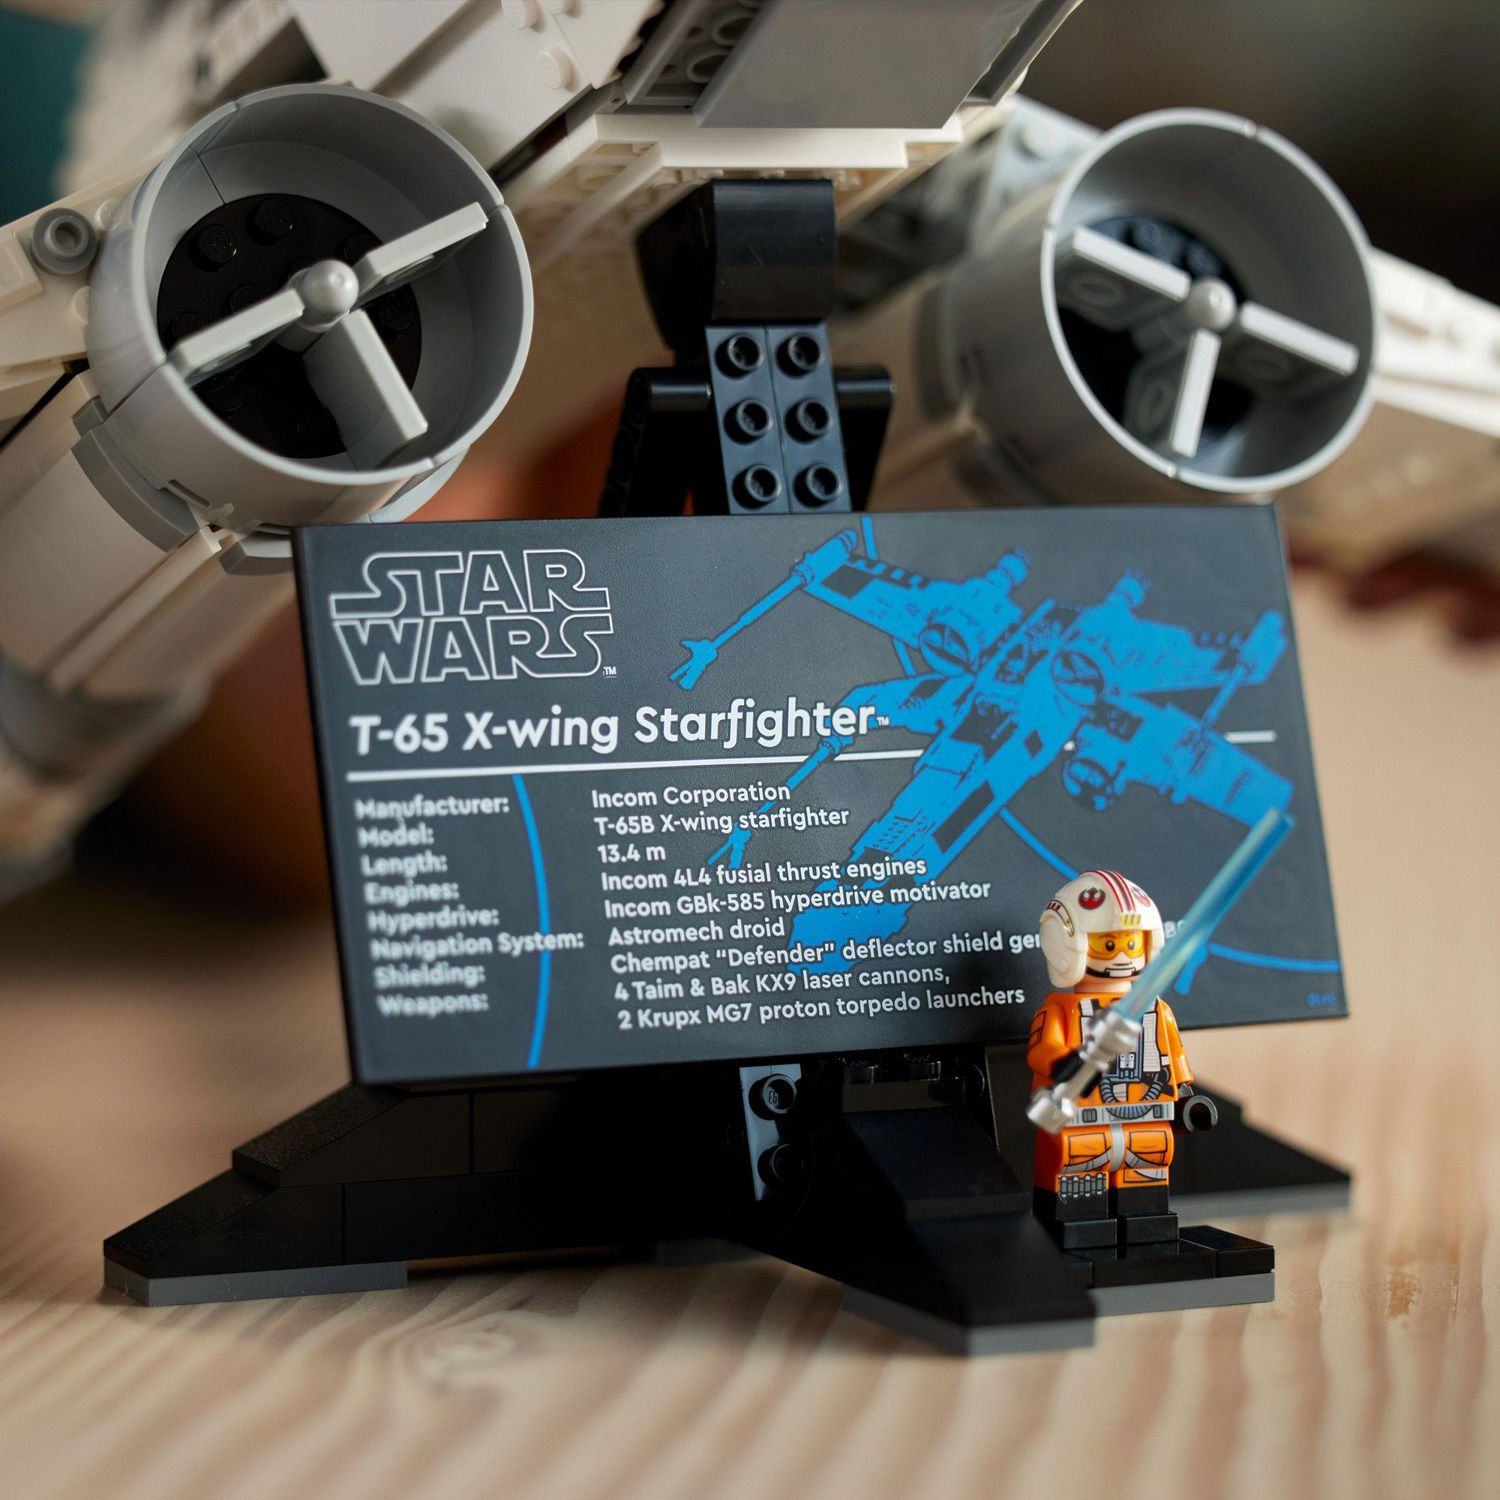 LEGO Star Wars Ultimate Collector Series X-Wing Starfighter 75355